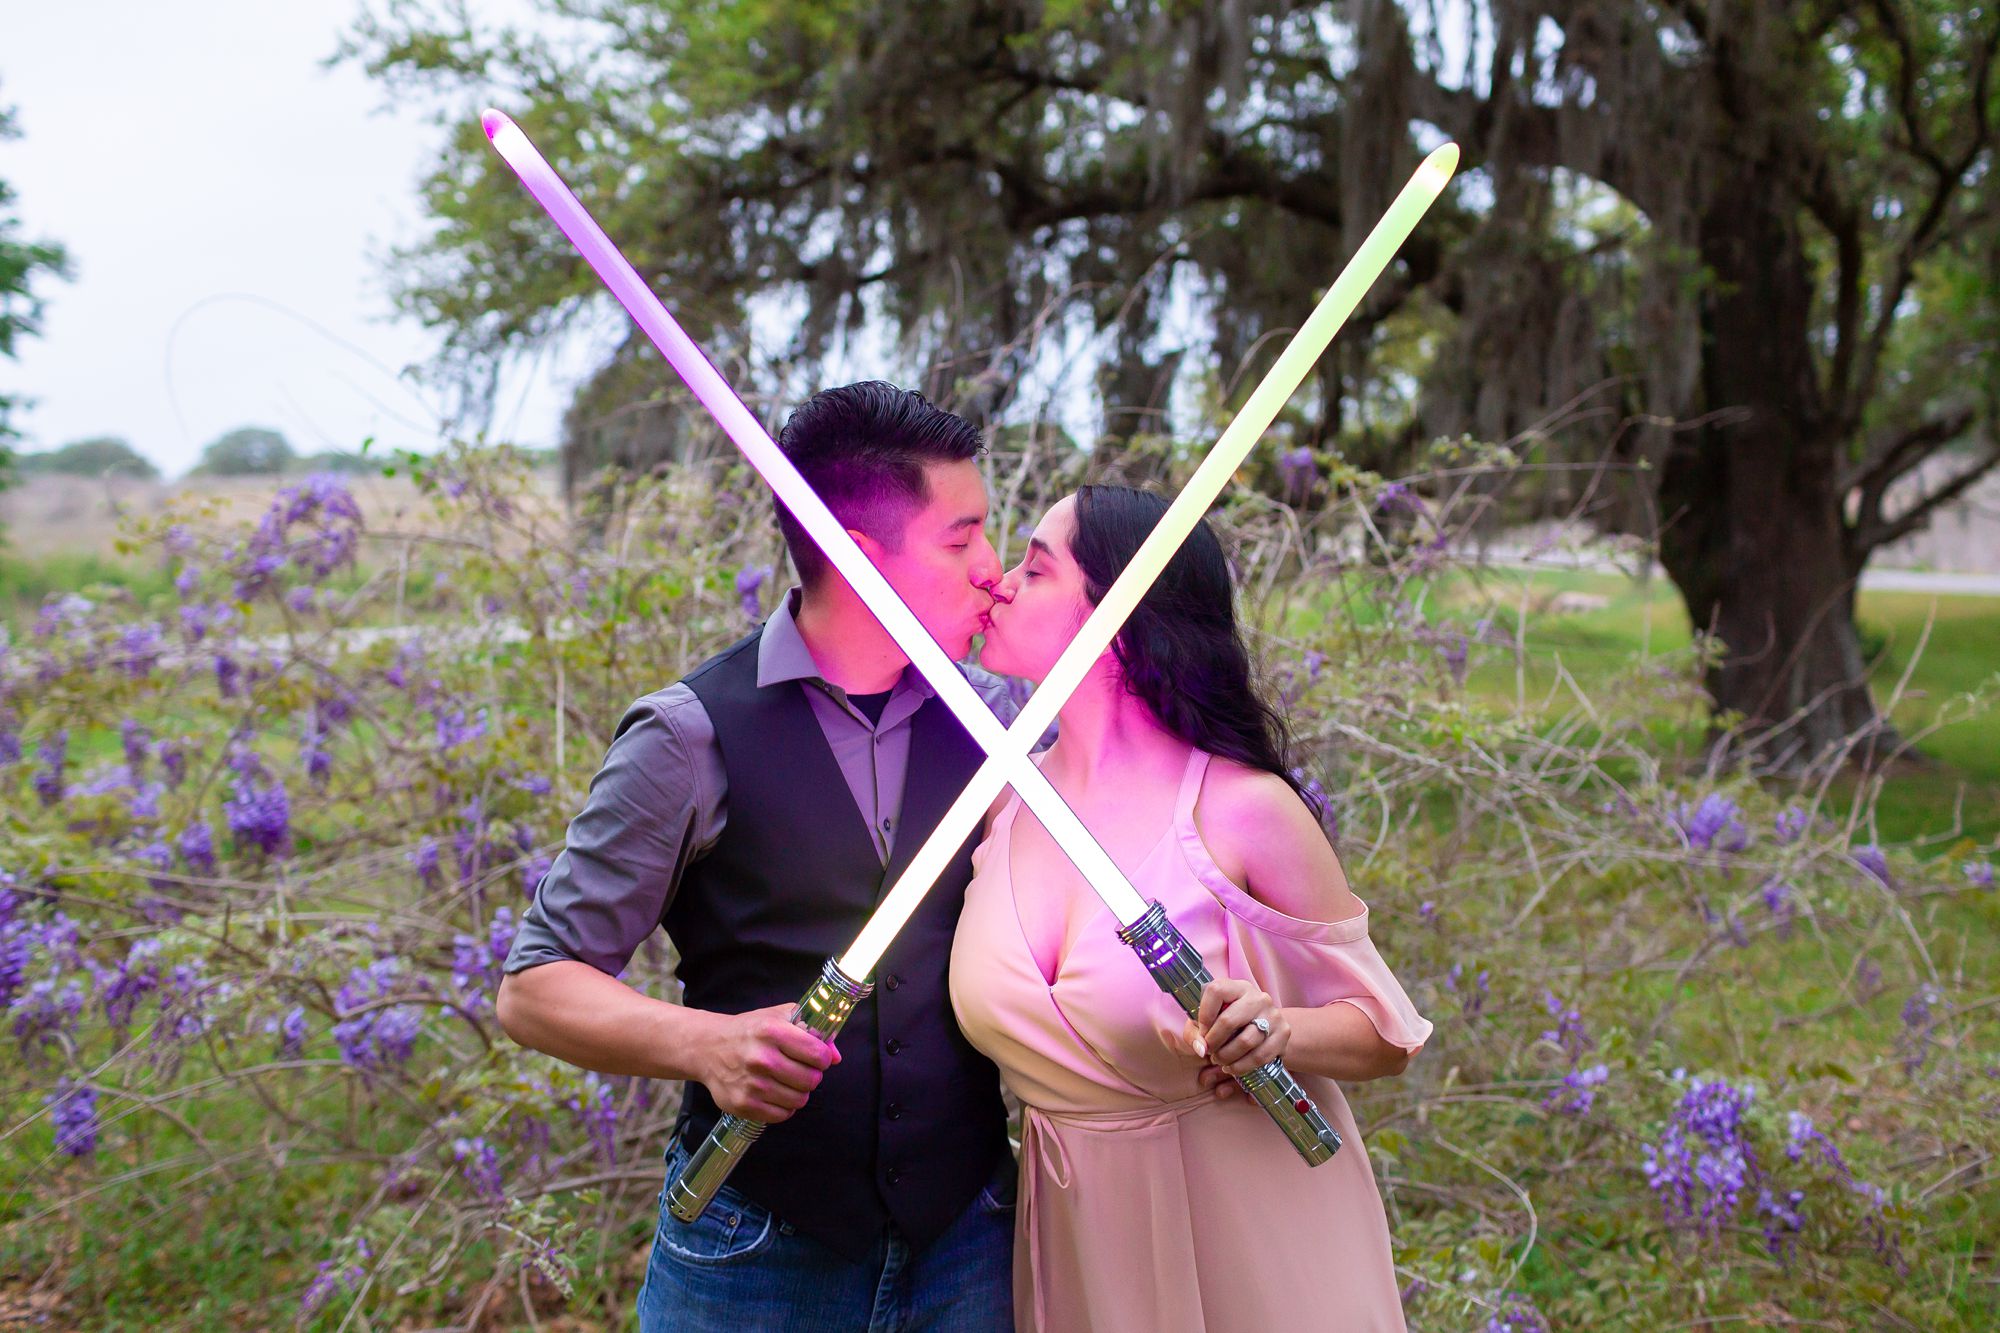 Man and woman holding lightsabers at their engagement session.